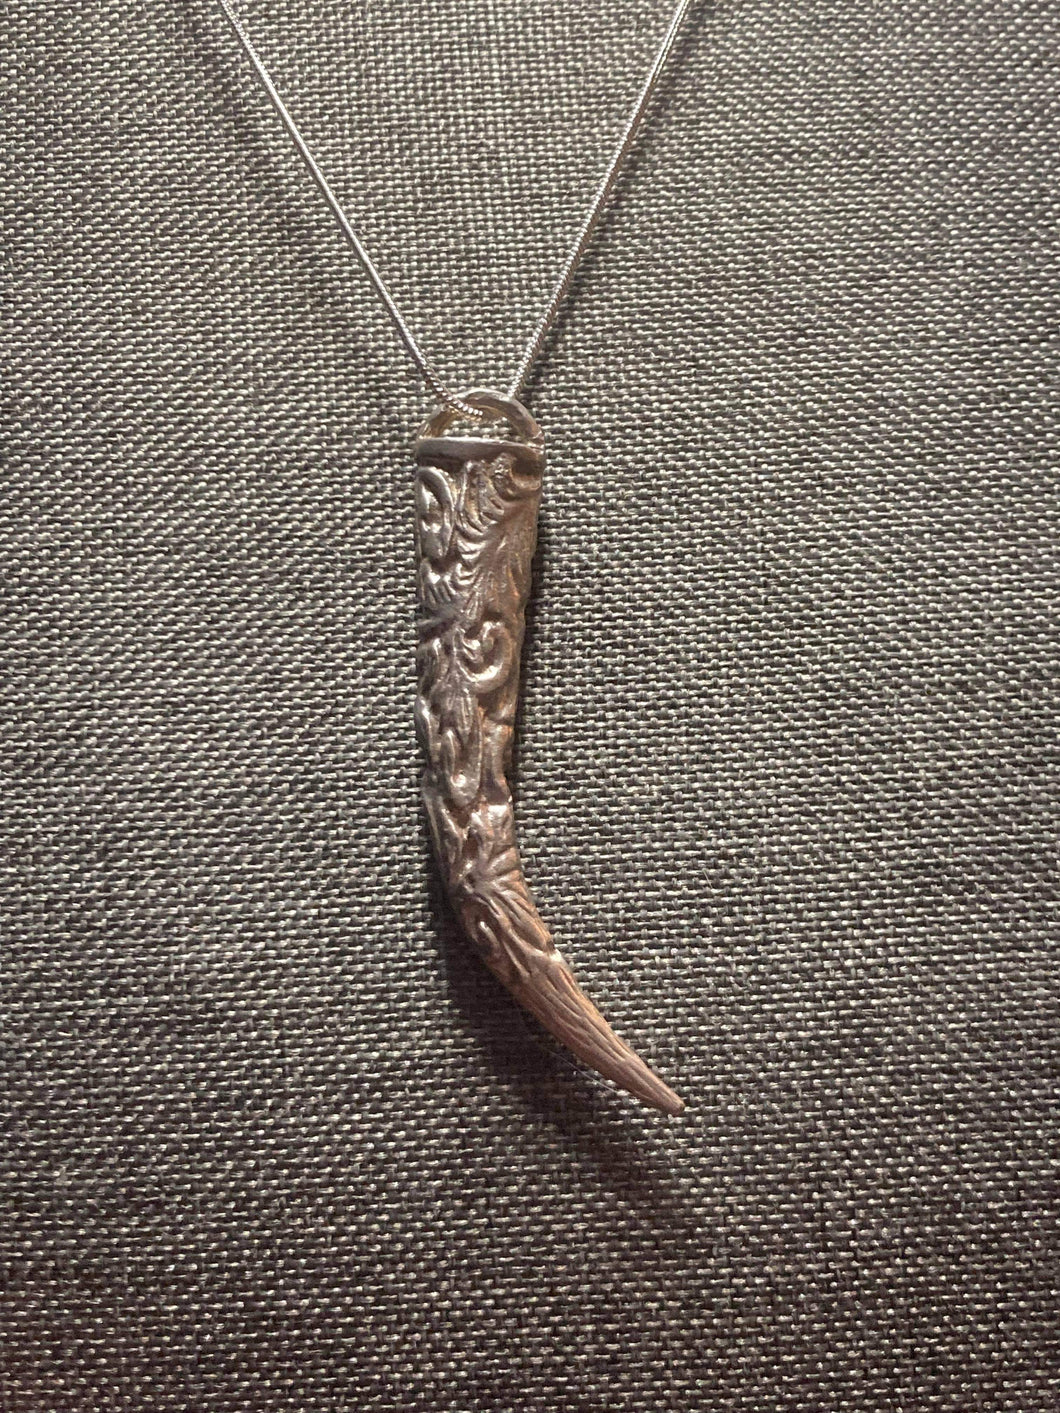 Scroll work wolf tooth pendant.